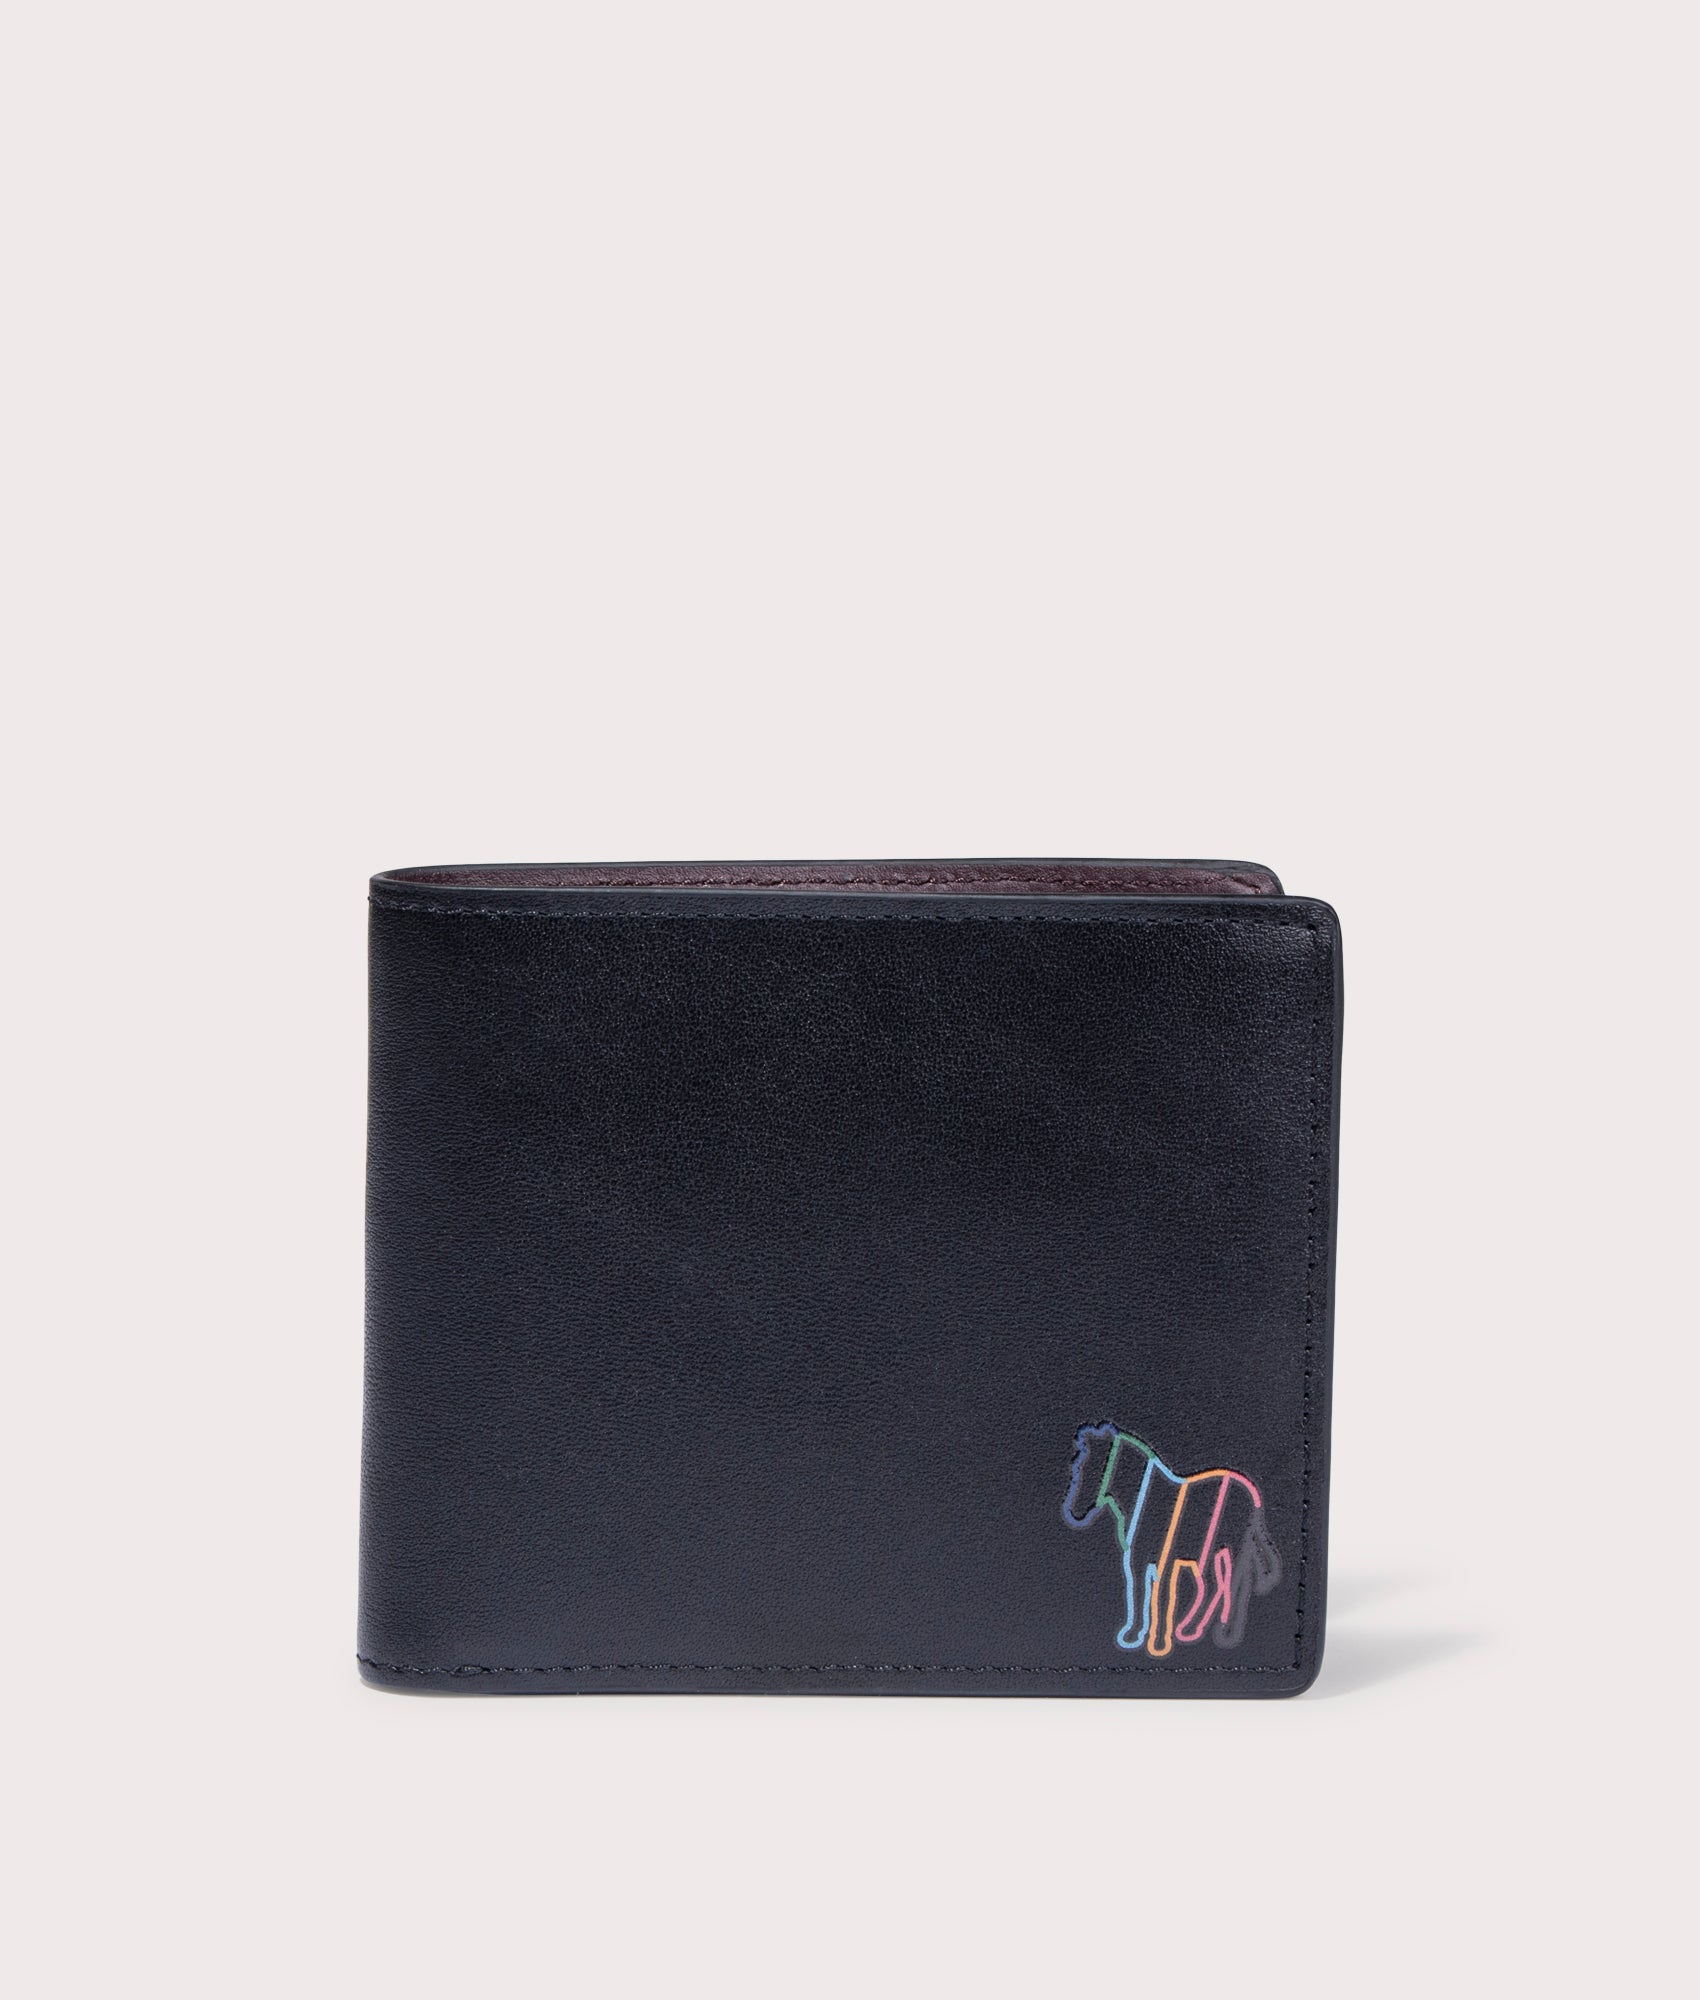 PS Paul Smith Mens Billfold Wallet - Colour: 79 Black - Size: One Size